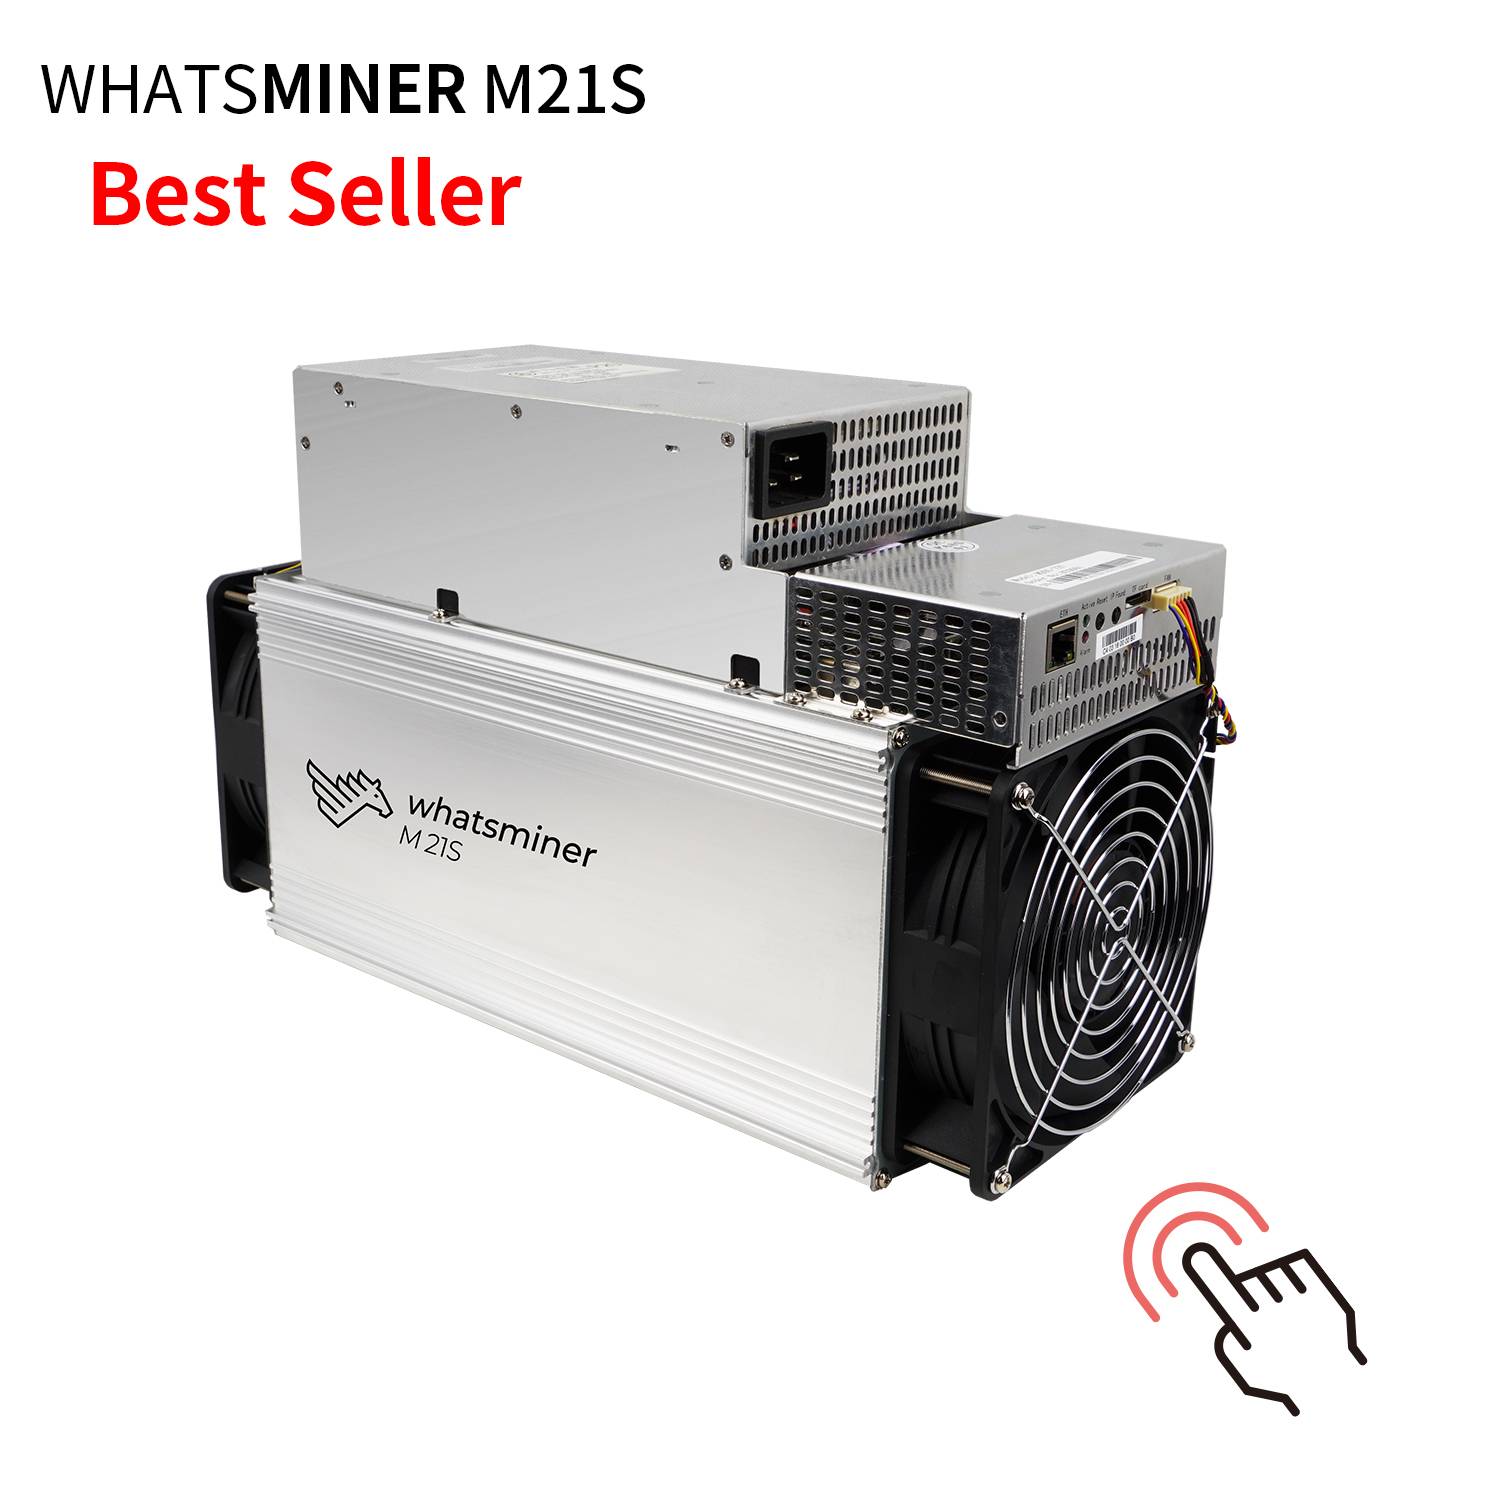 China wholesale Whatsminer M20s - 2020 Top3 Short ROI Asic Miner Microbt Whatsminer M21s 56Th/s bitcoin mining machine wholesale – Skycorp